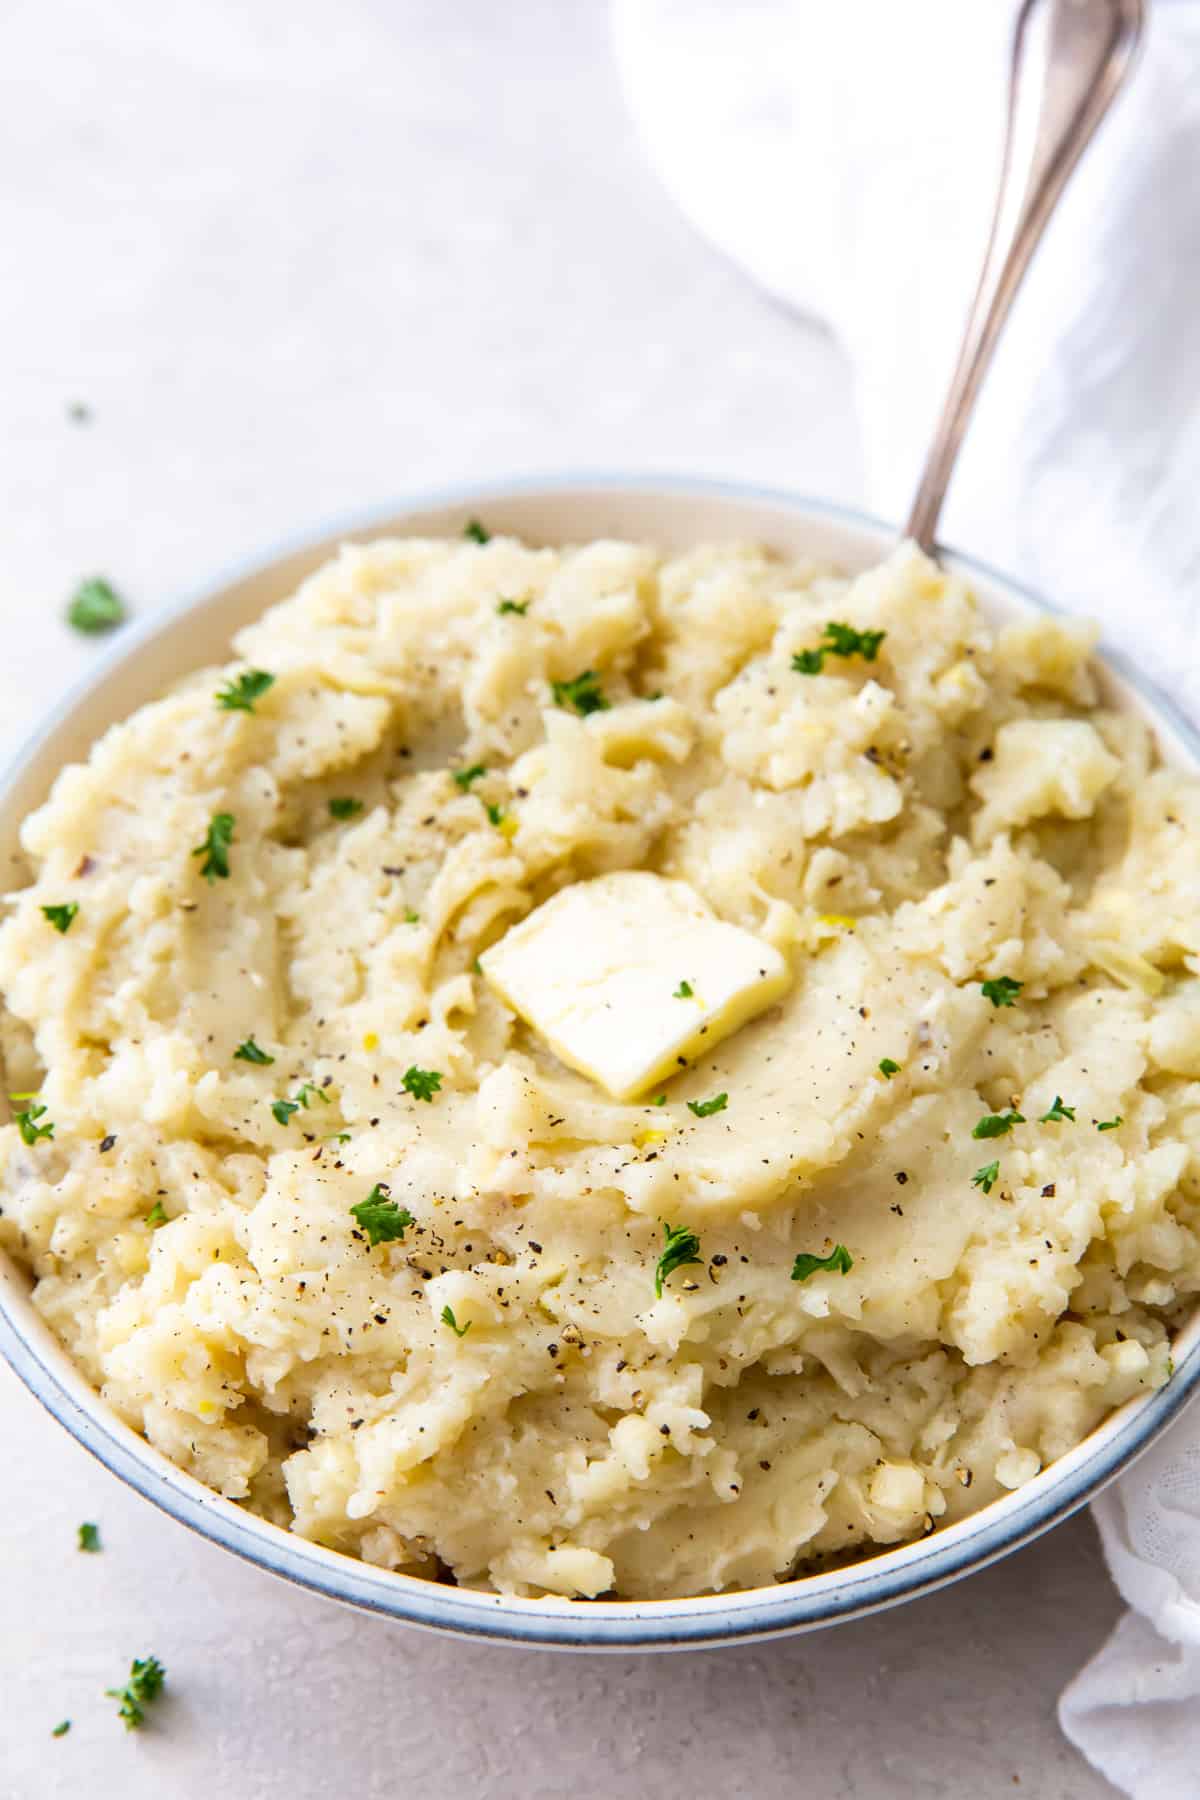  A spoon resting in a bowl of mashed potatoes topped with a pat of butter.